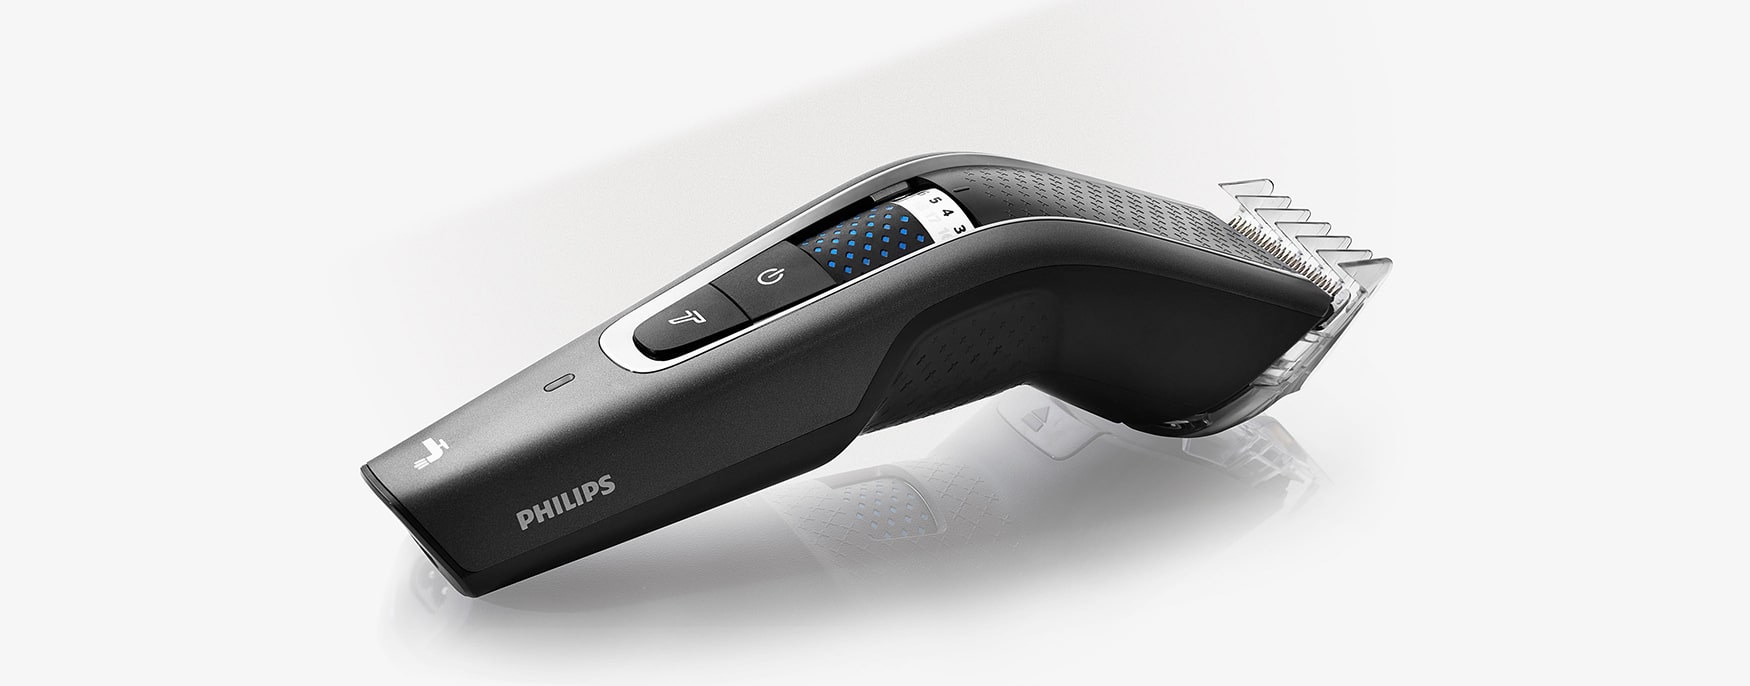 Hero shot of the Philips trimmer on a clean, reflective background. A concept photo, that would look great as a website banner, or as a main product shot.